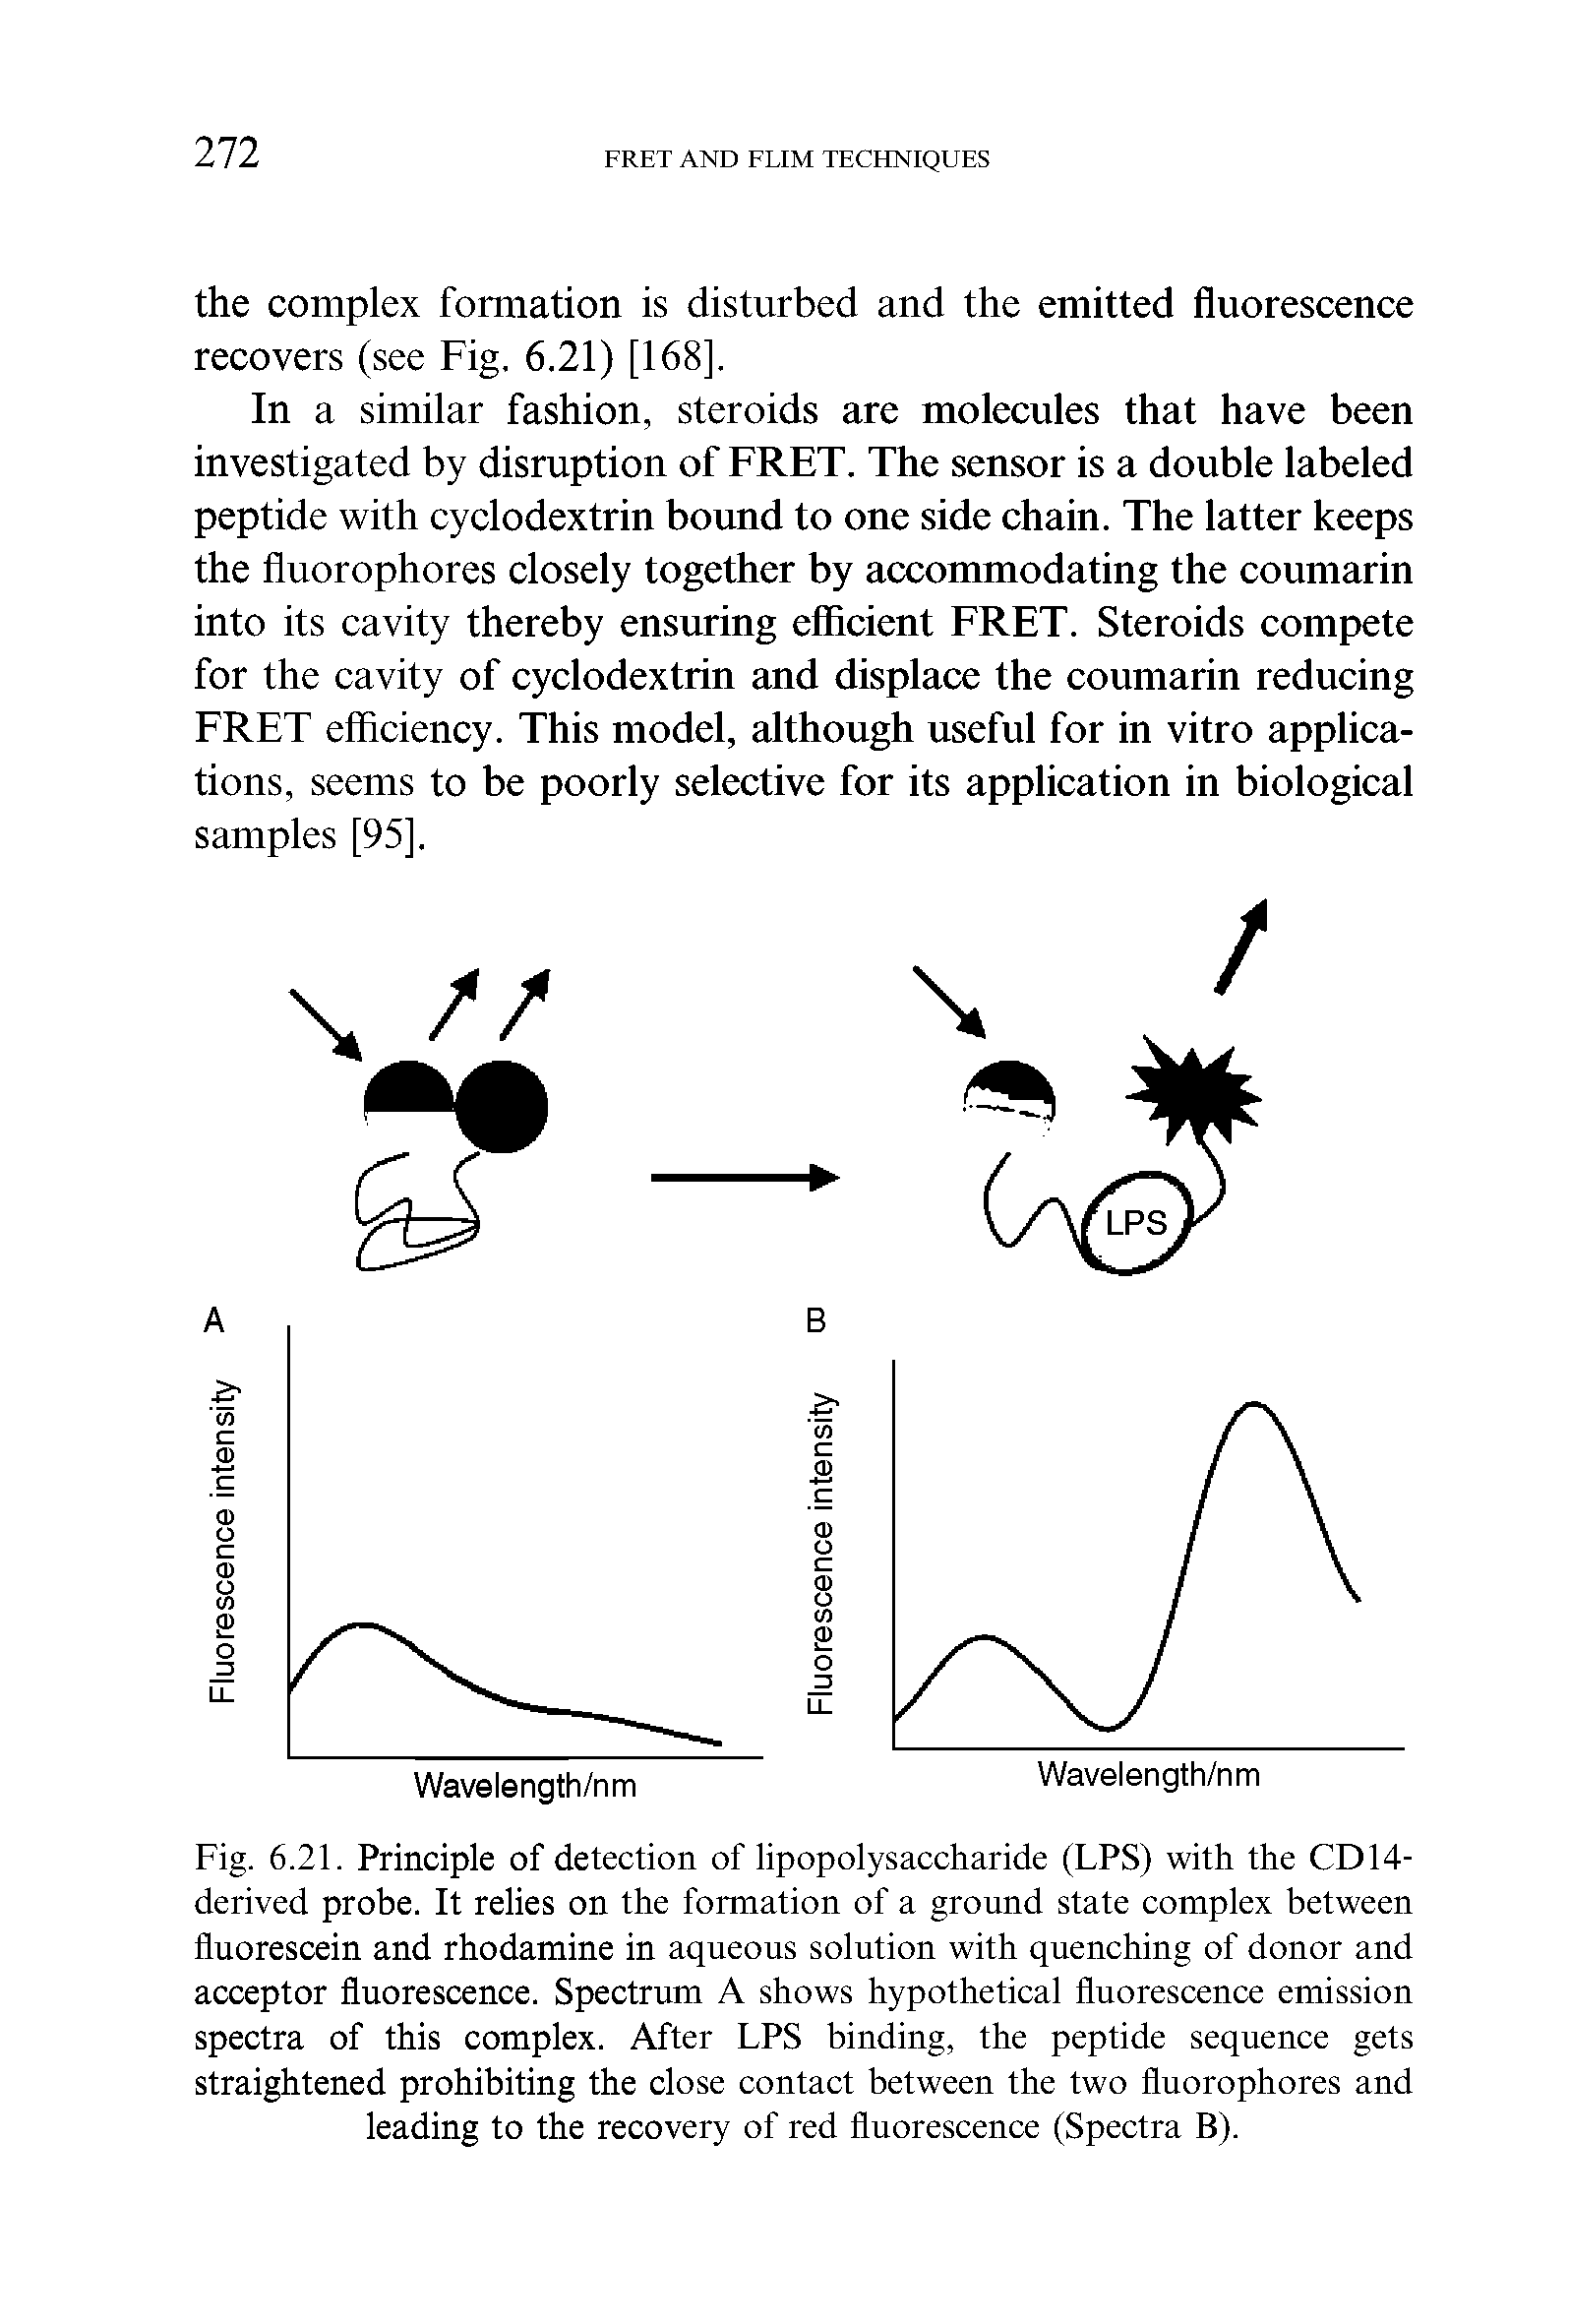 Fig. 6.21. Principle of detection of lipopolysaccharide (LPS) with the CD14-derived probe. It relies on the formation of a ground state complex between fluorescein and rhodamine in aqueous solution with quenching of donor and acceptor fluorescence. Spectrum A shows hypothetical fluorescence emission spectra of this complex. After LPS binding, the peptide sequence gets straightened prohibiting the close contact between the two fluorophores and leading to the recovery of red fluorescence (Spectra B).